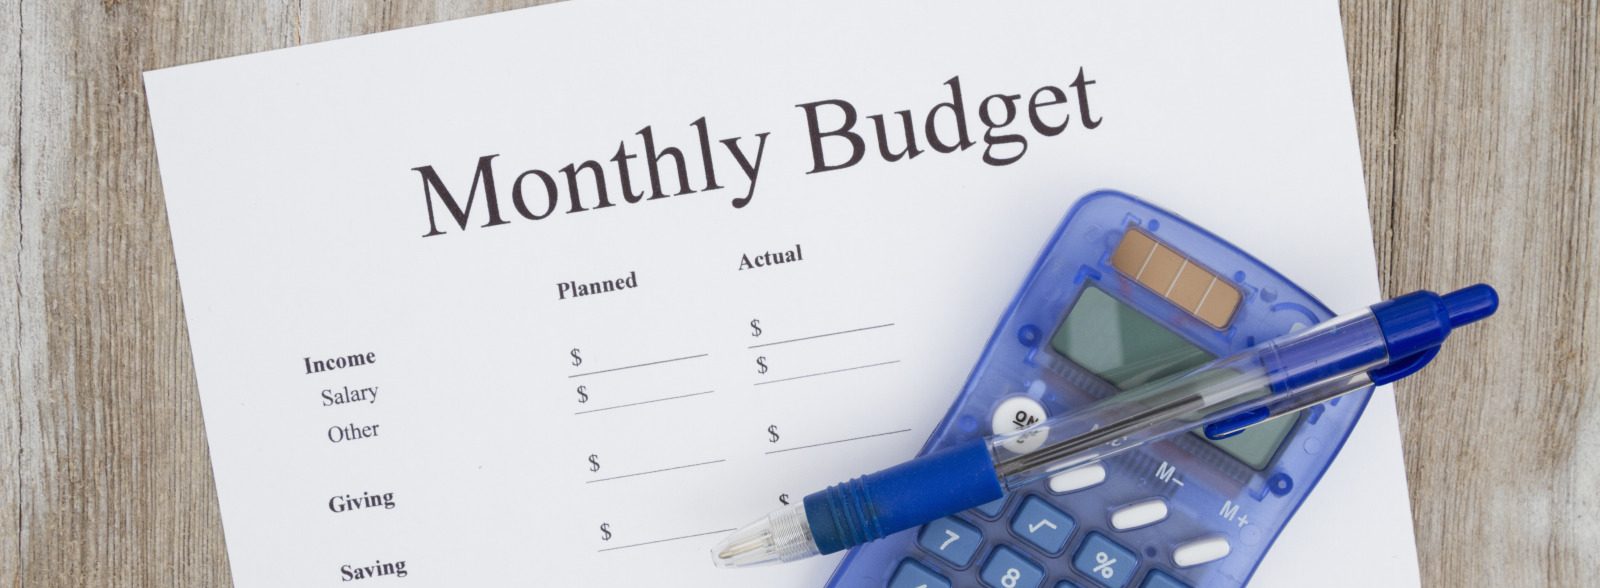 Monthly Budget sheet